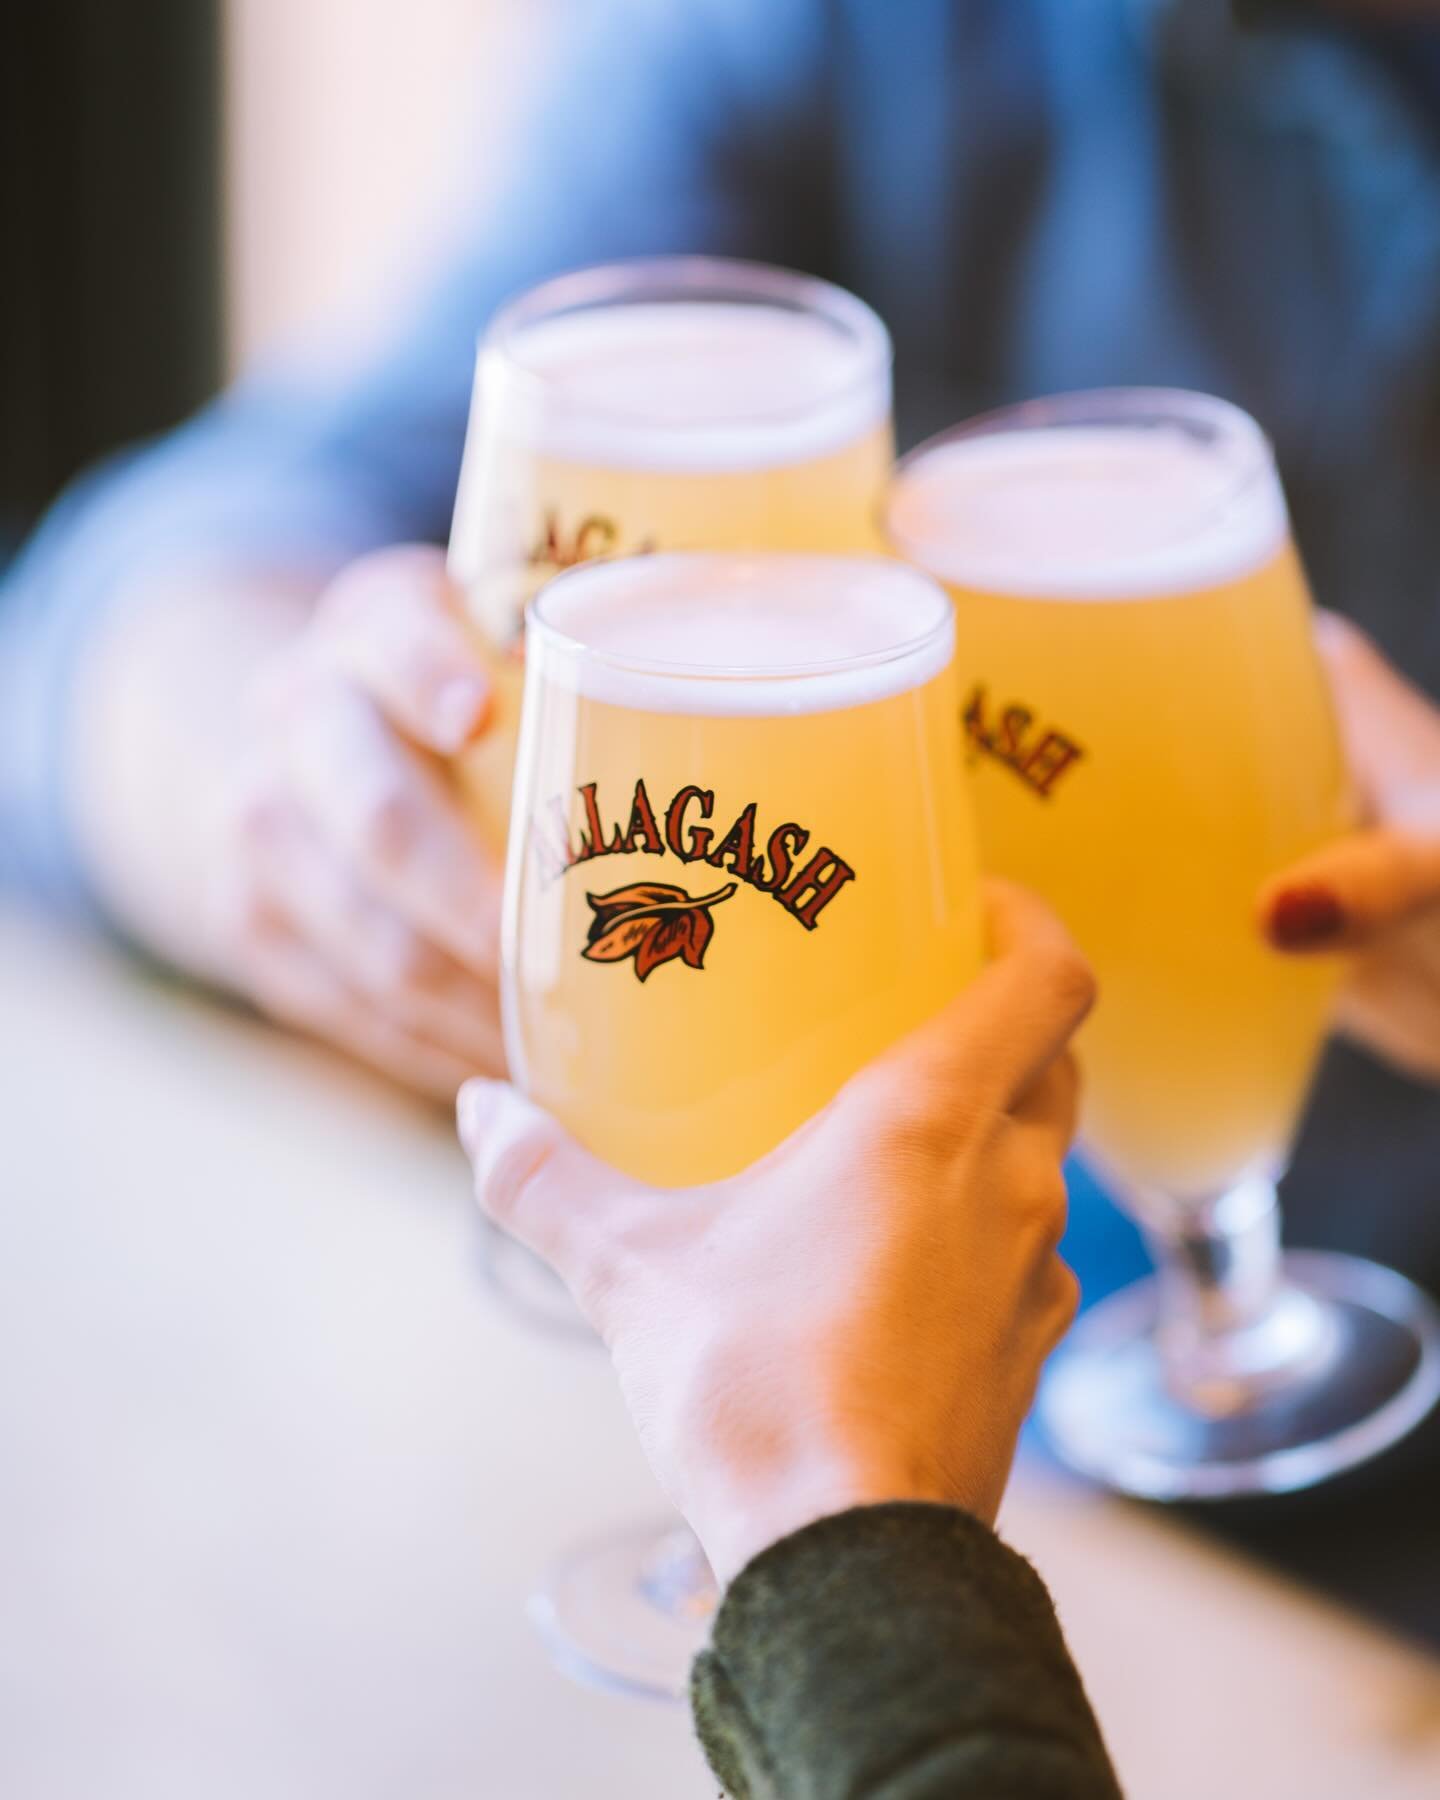 Cheers to this and that and everything else. You made it to Friday. See you at the Pie!

#portlandpieco #allagashbrewing #pizza #mainepizza #cheerstofriday